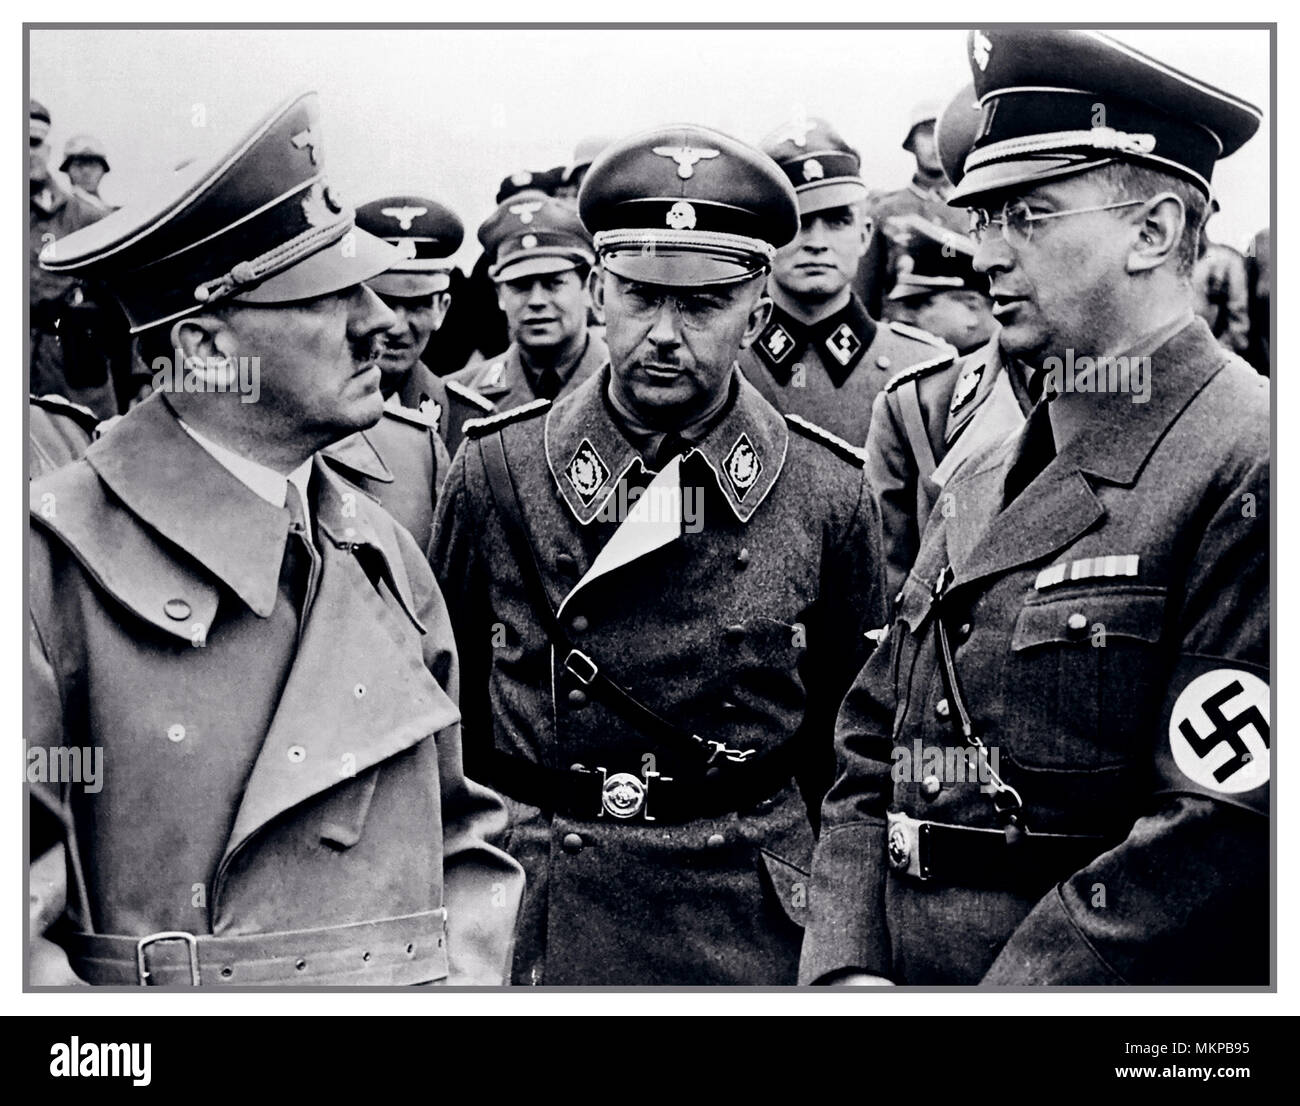 HITLER, HIMMLER, HENLEIN, Vintage WW2 1940's  B&W image of Adolf Hitler leader of the Nazi Party (Nationalsozialistische Deutsche Arbeiterpartei; NSDAP), Chancellor of Germany from 1933 to 1945 and Führer ('Leader') of Nazi Germany from 1934 to 1945  Heinrich Himmler Reichsführer of the Schutzstaffel (Protection Squadron; Waffen SS), and a leading member of the Nazi Party (NSDAP) of German & Konrad Henlein Reichsstatthalter and Gauleiter of the Reichsgau Sudetenland wearing a swastika armband. All in uniform standing talking, with SS officers grouped behind Stock Photo